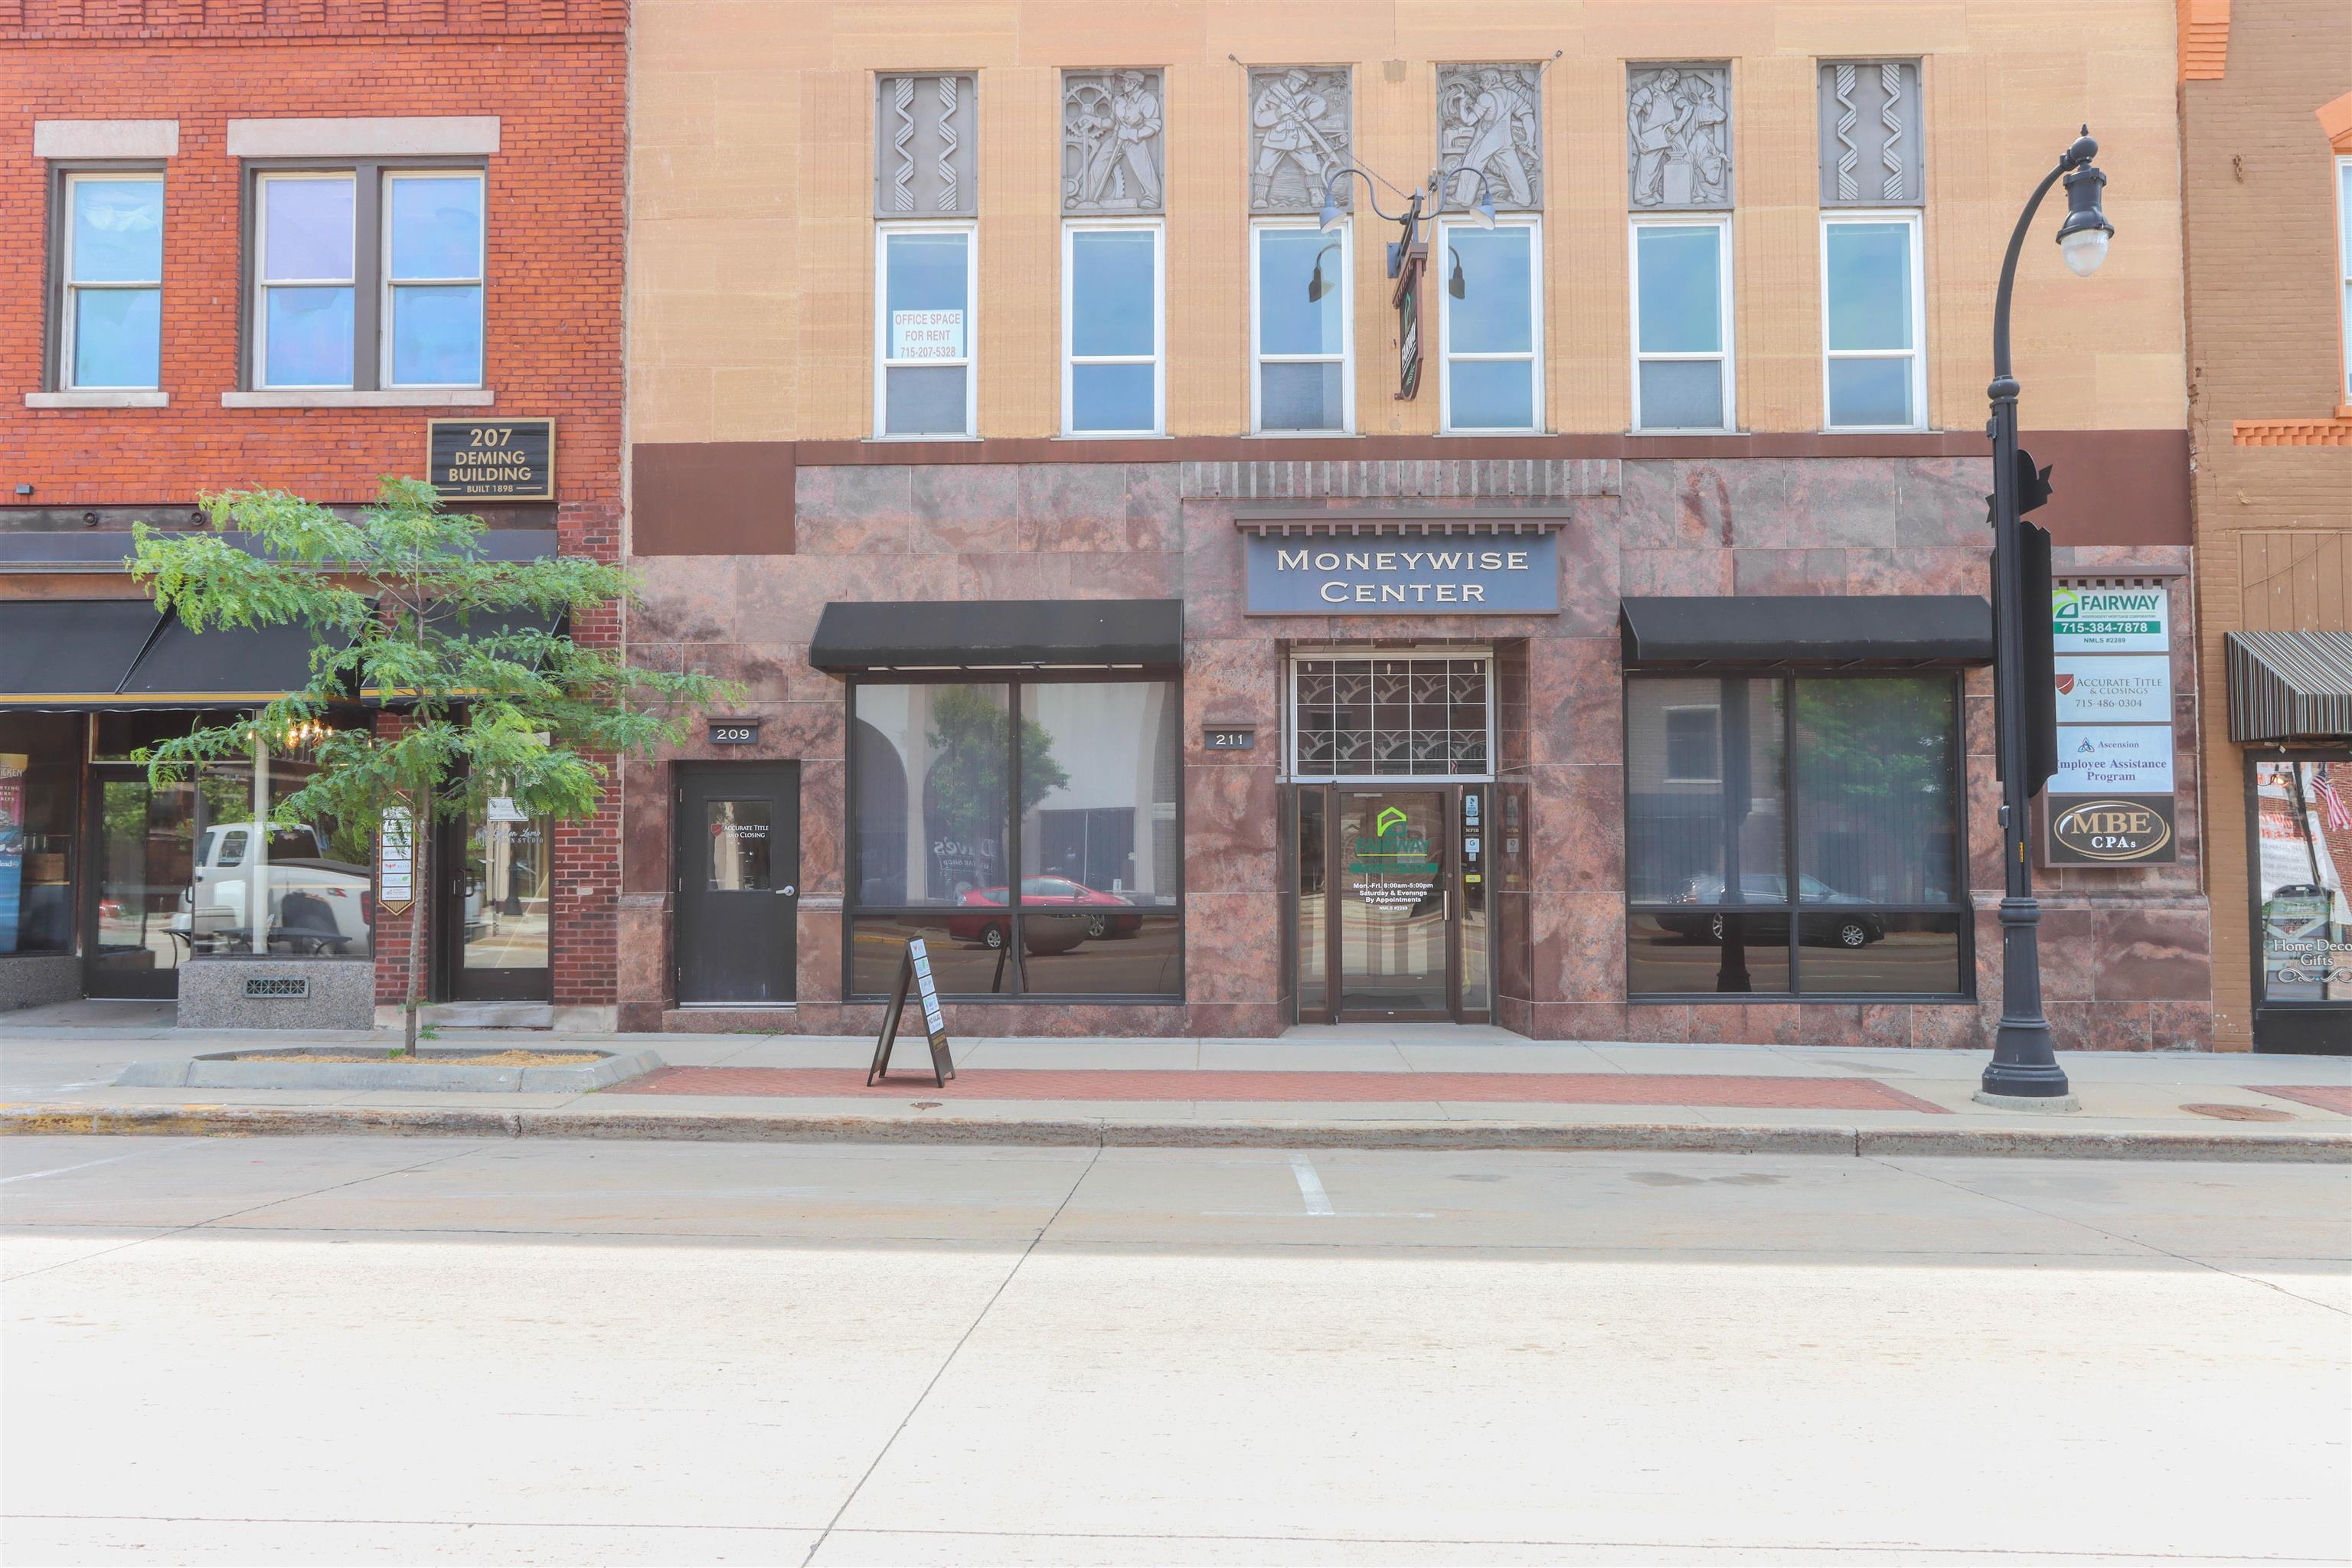 209 S CENTRAL AVENUE, Marshfield, Wisconsin 54449, ,Commercial/industrial,For Rent,209 S CENTRAL AVENUE,22401366